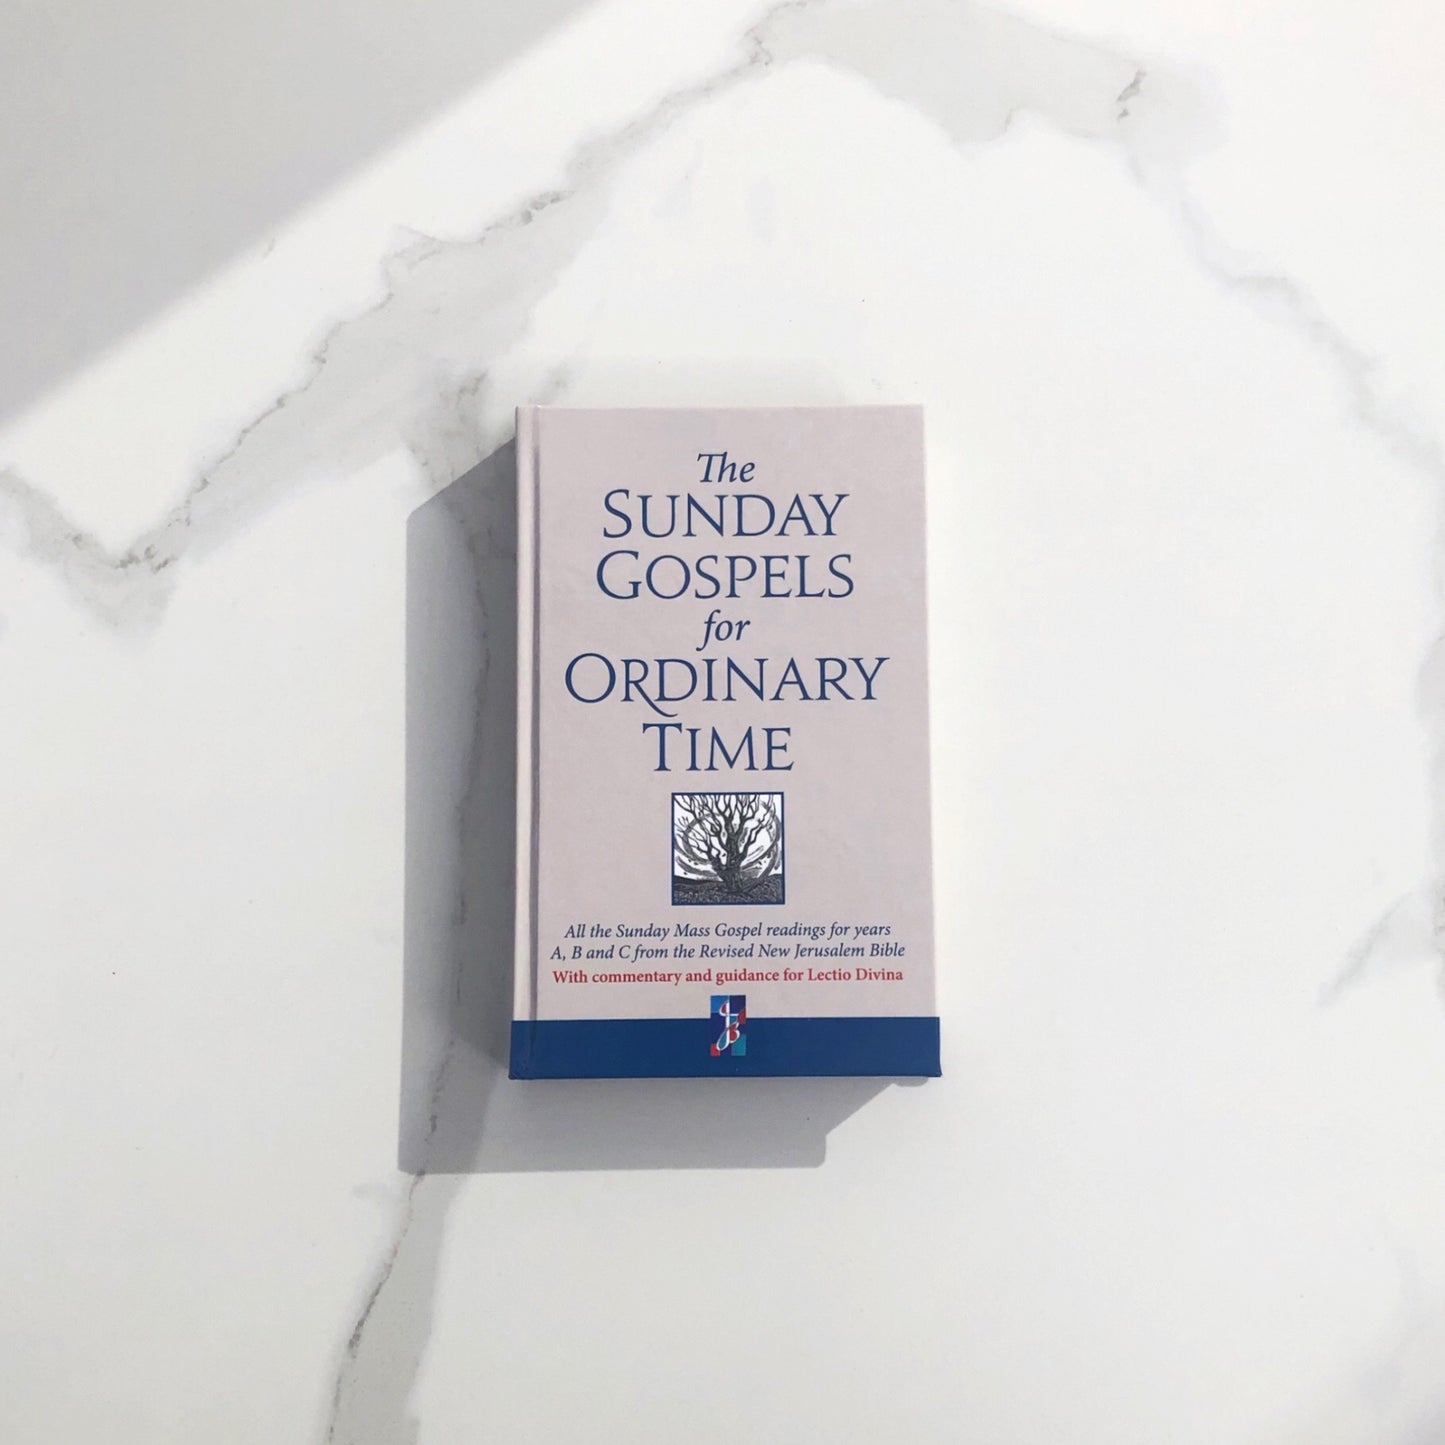 The Sunday Gospels for Ordinary Time